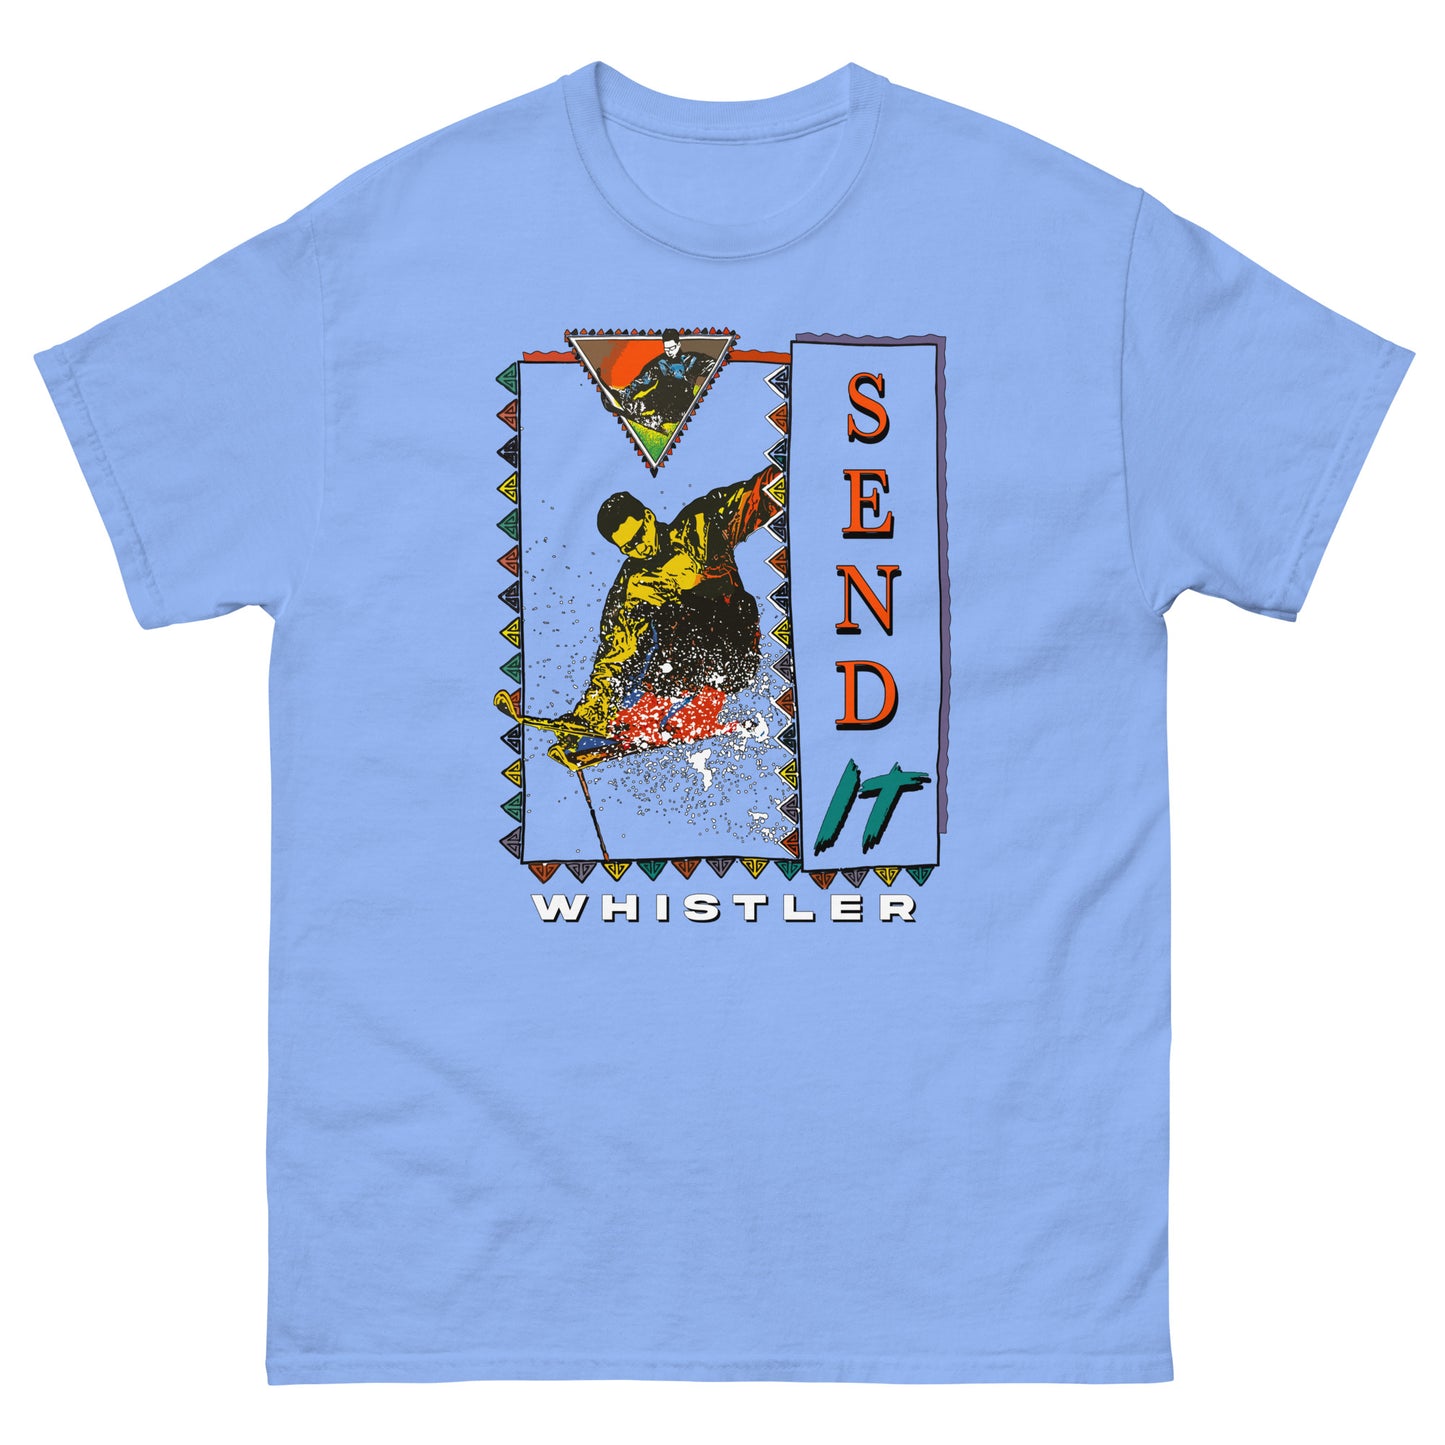 Send it Whistler printed on T-shirt by Whistler Shirts